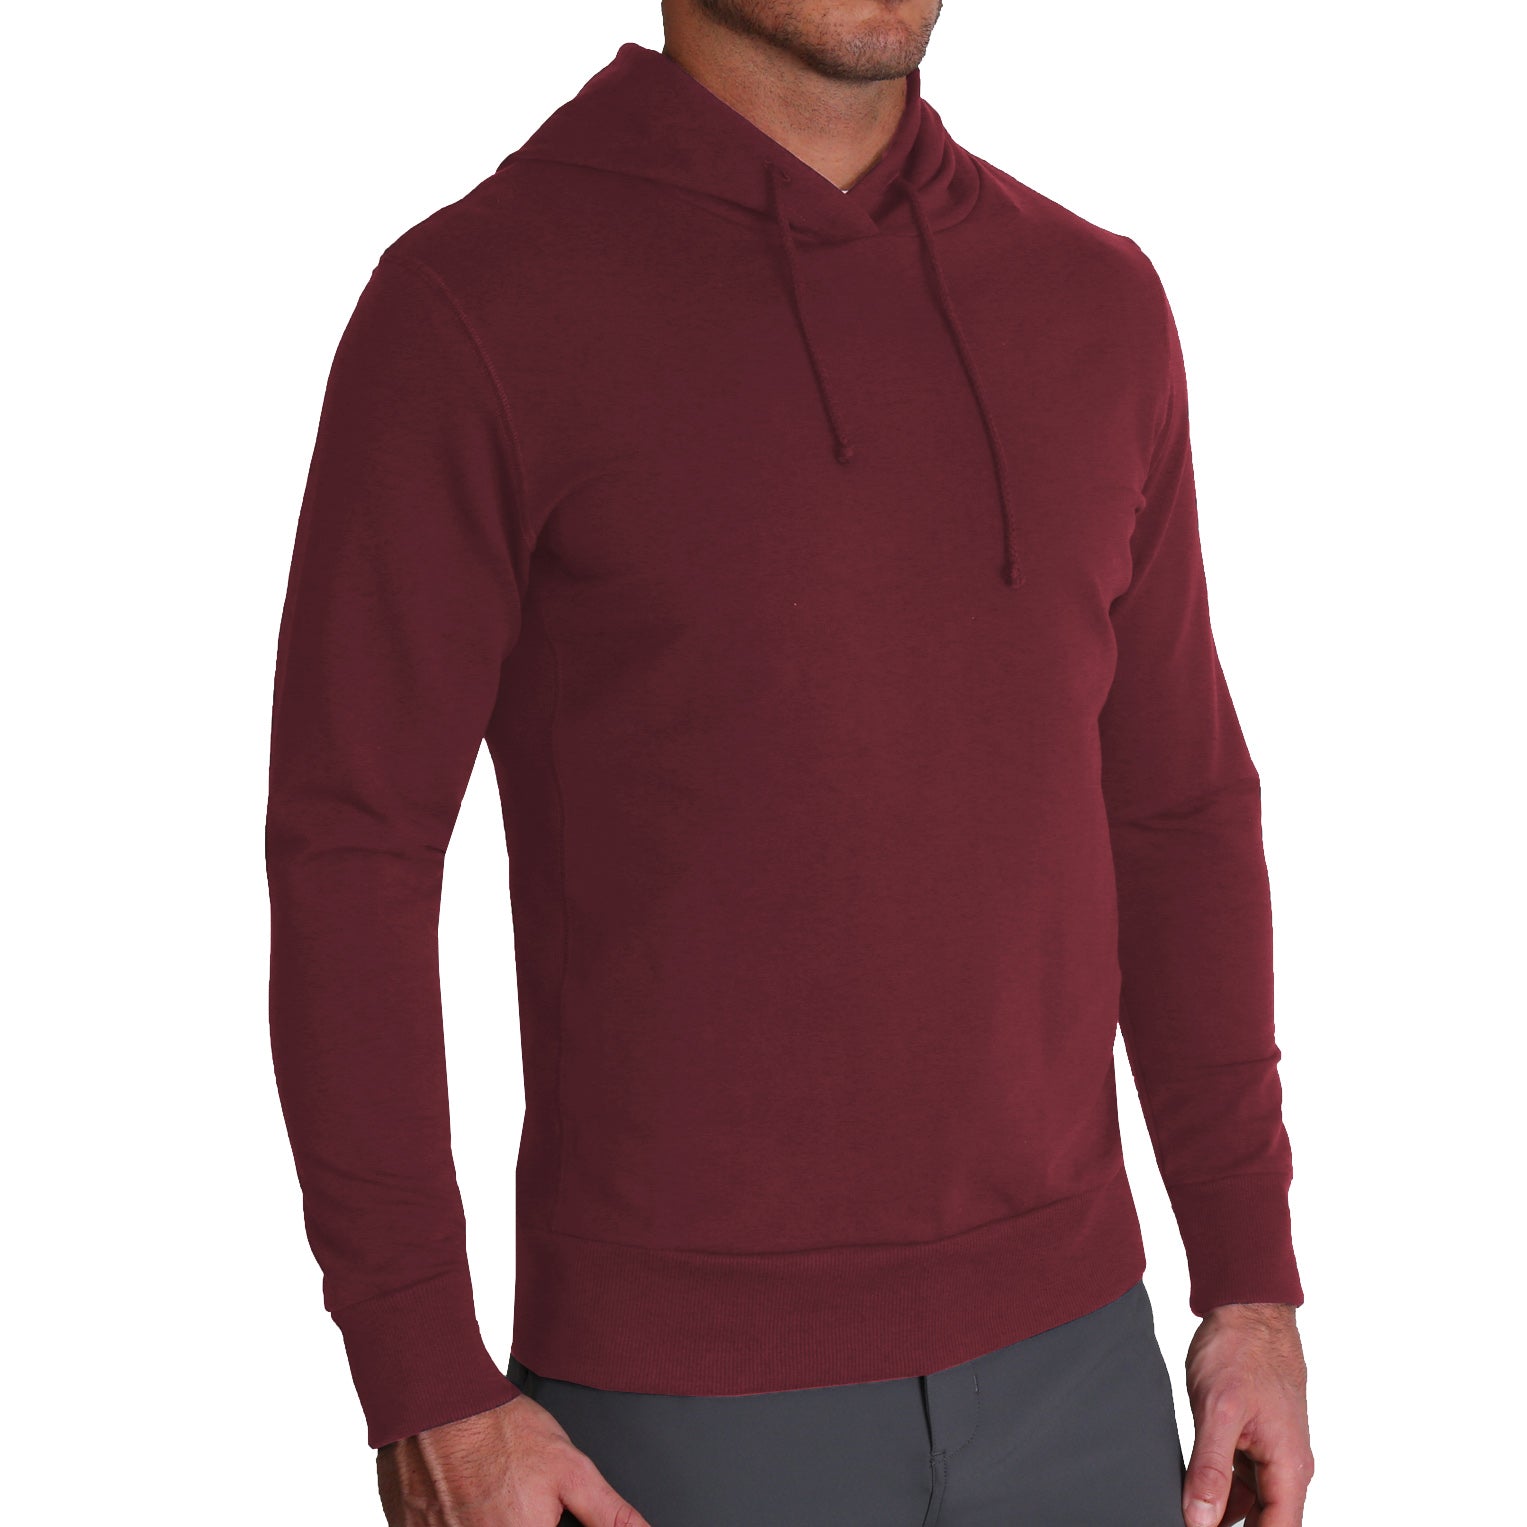 Sleutel maat geschenk Solid Maroon Hoodie - State and Liberty Clothing Company